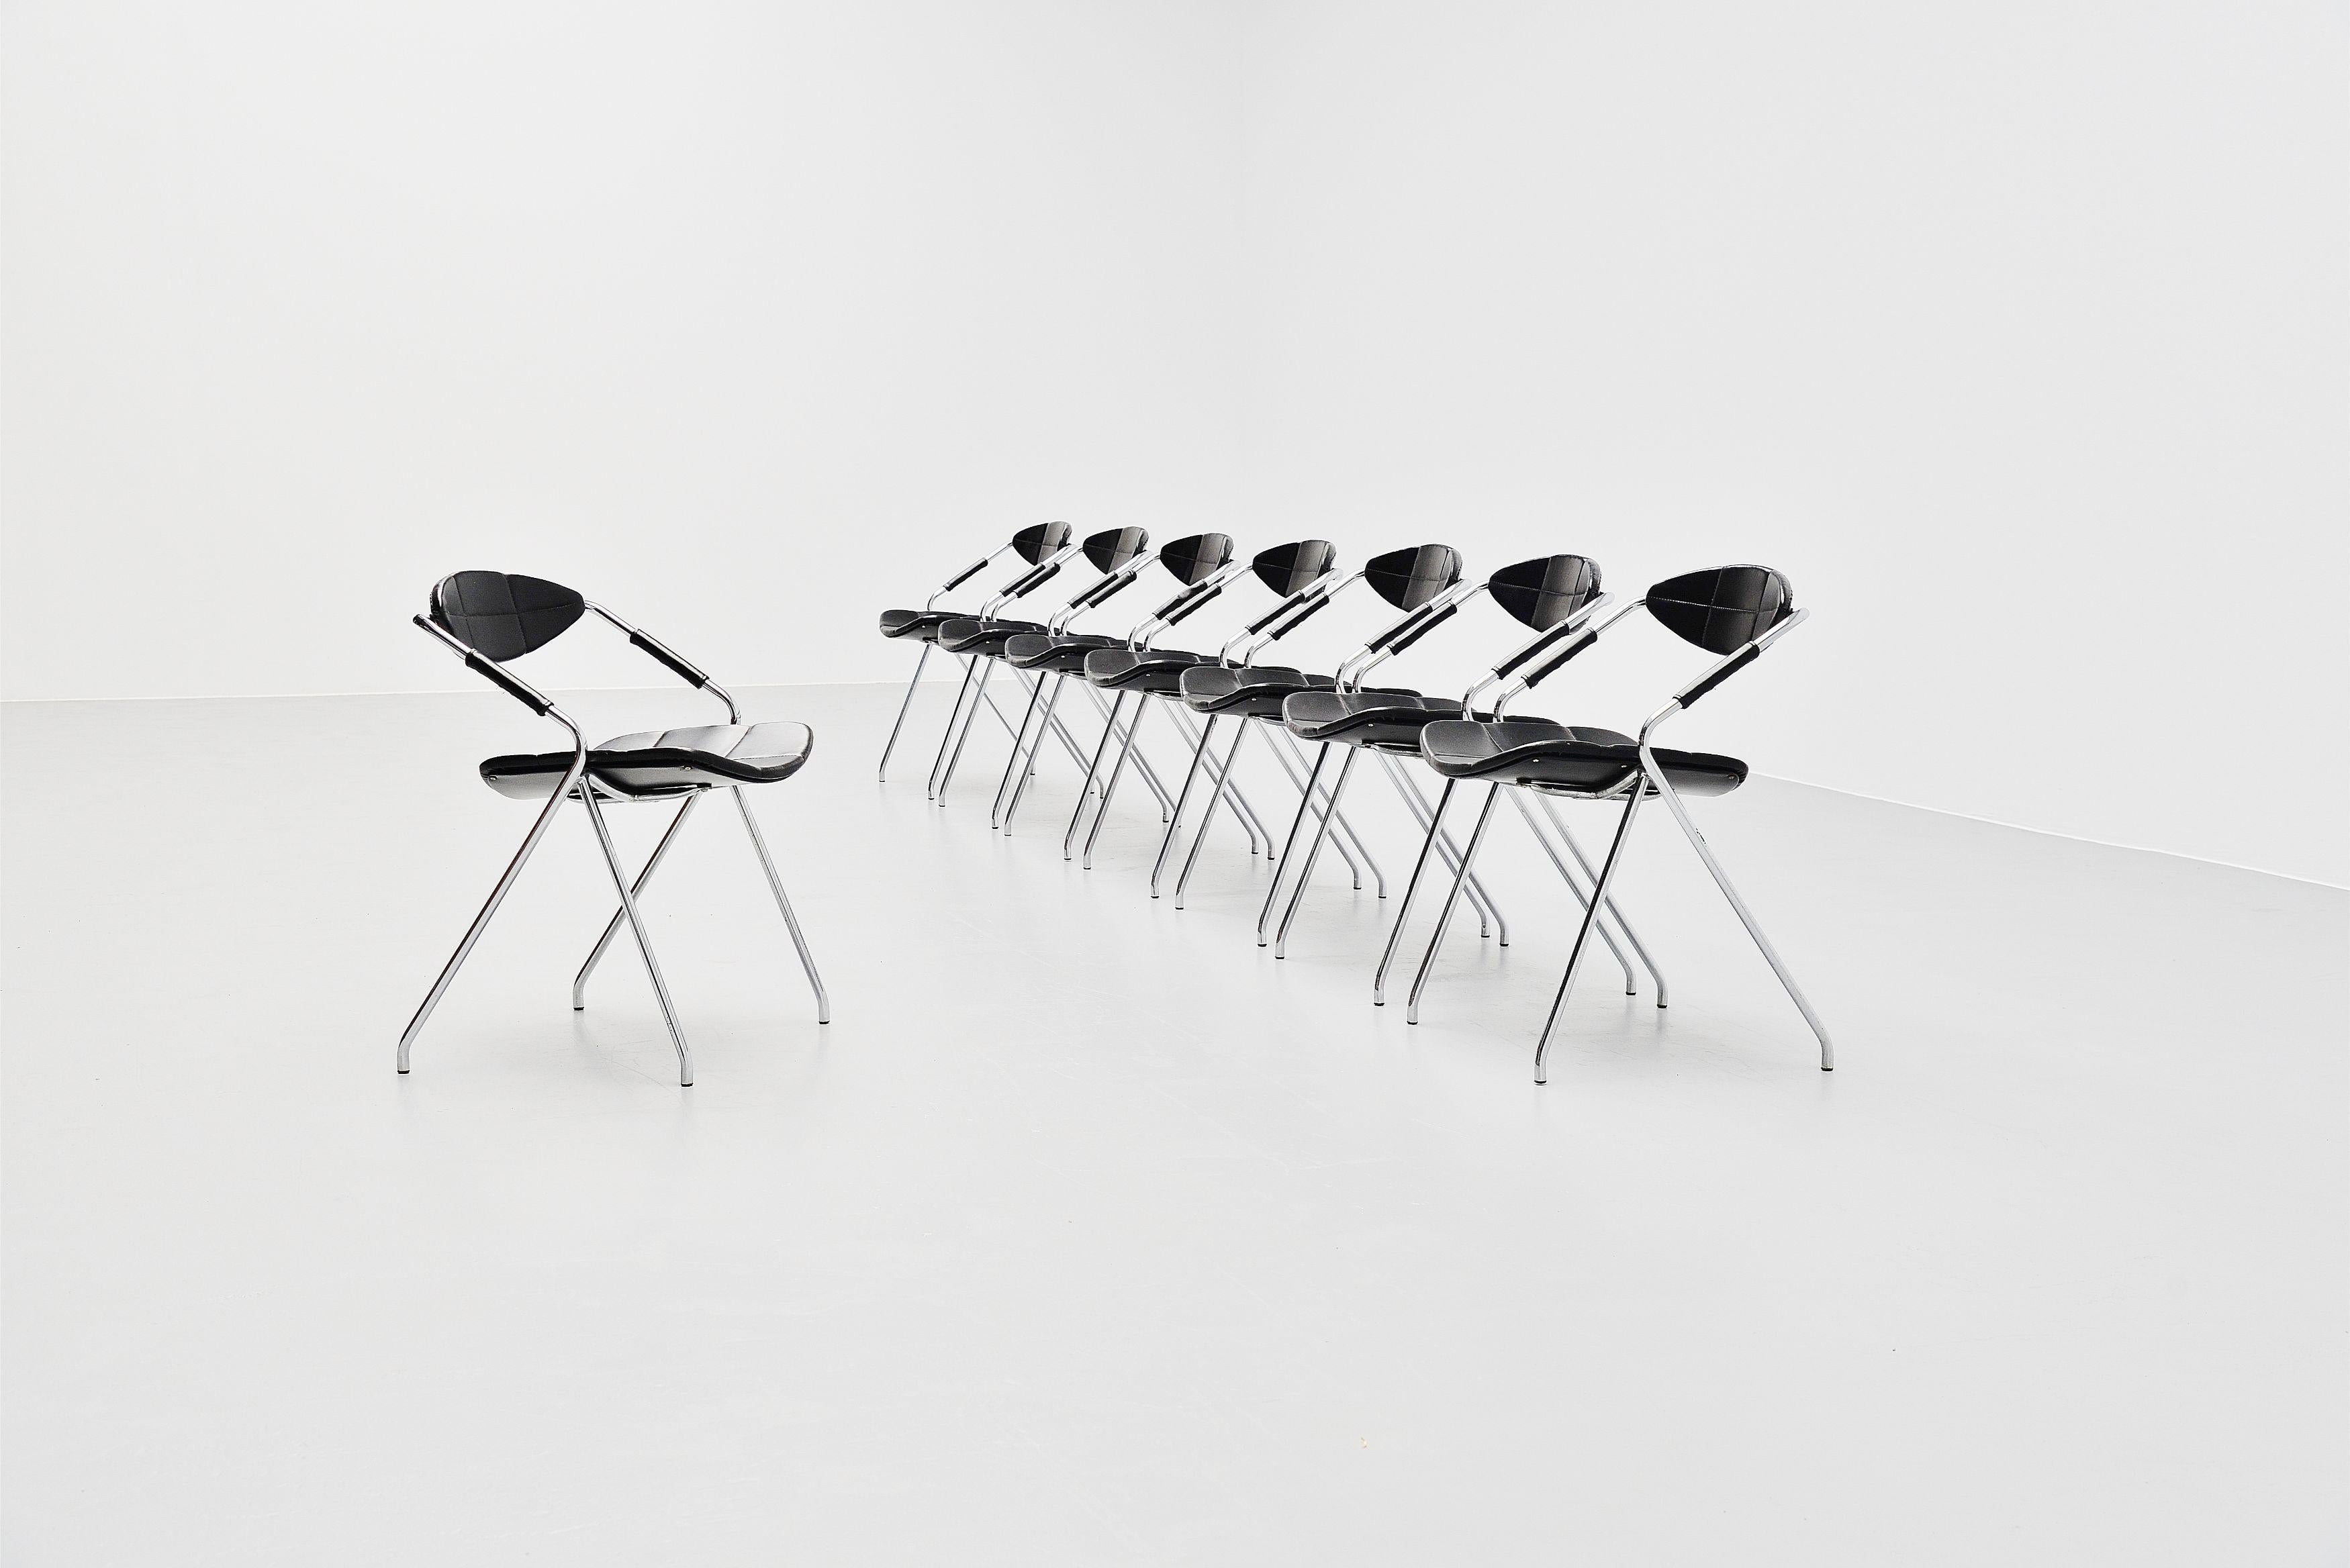 Fantastic set of 8 so called Rugby / Ellipse chairs designed by Gilbert Steiner and manufactured by Steiner, France 1962. These chairs have chrome plated tubular metal frames and very nice high quality leatherette black seats. The chairs are